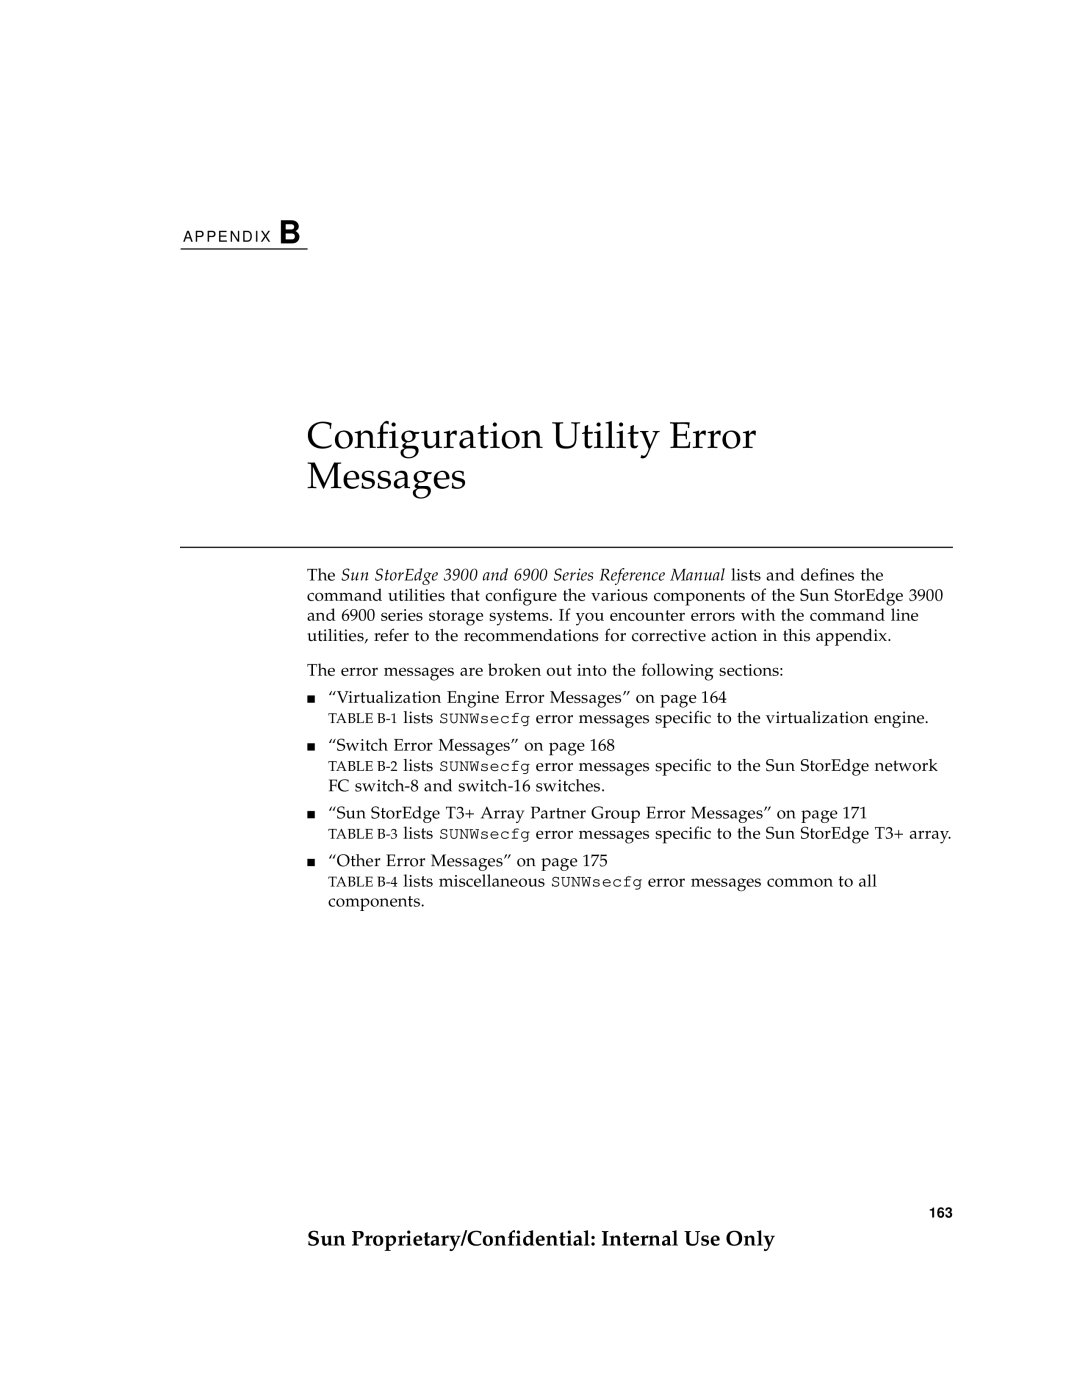 Sun Microsystems 6900, 3900 manual Configuration Utility Error Messages, Sun Proprietary/Confidential Internal Use Only 